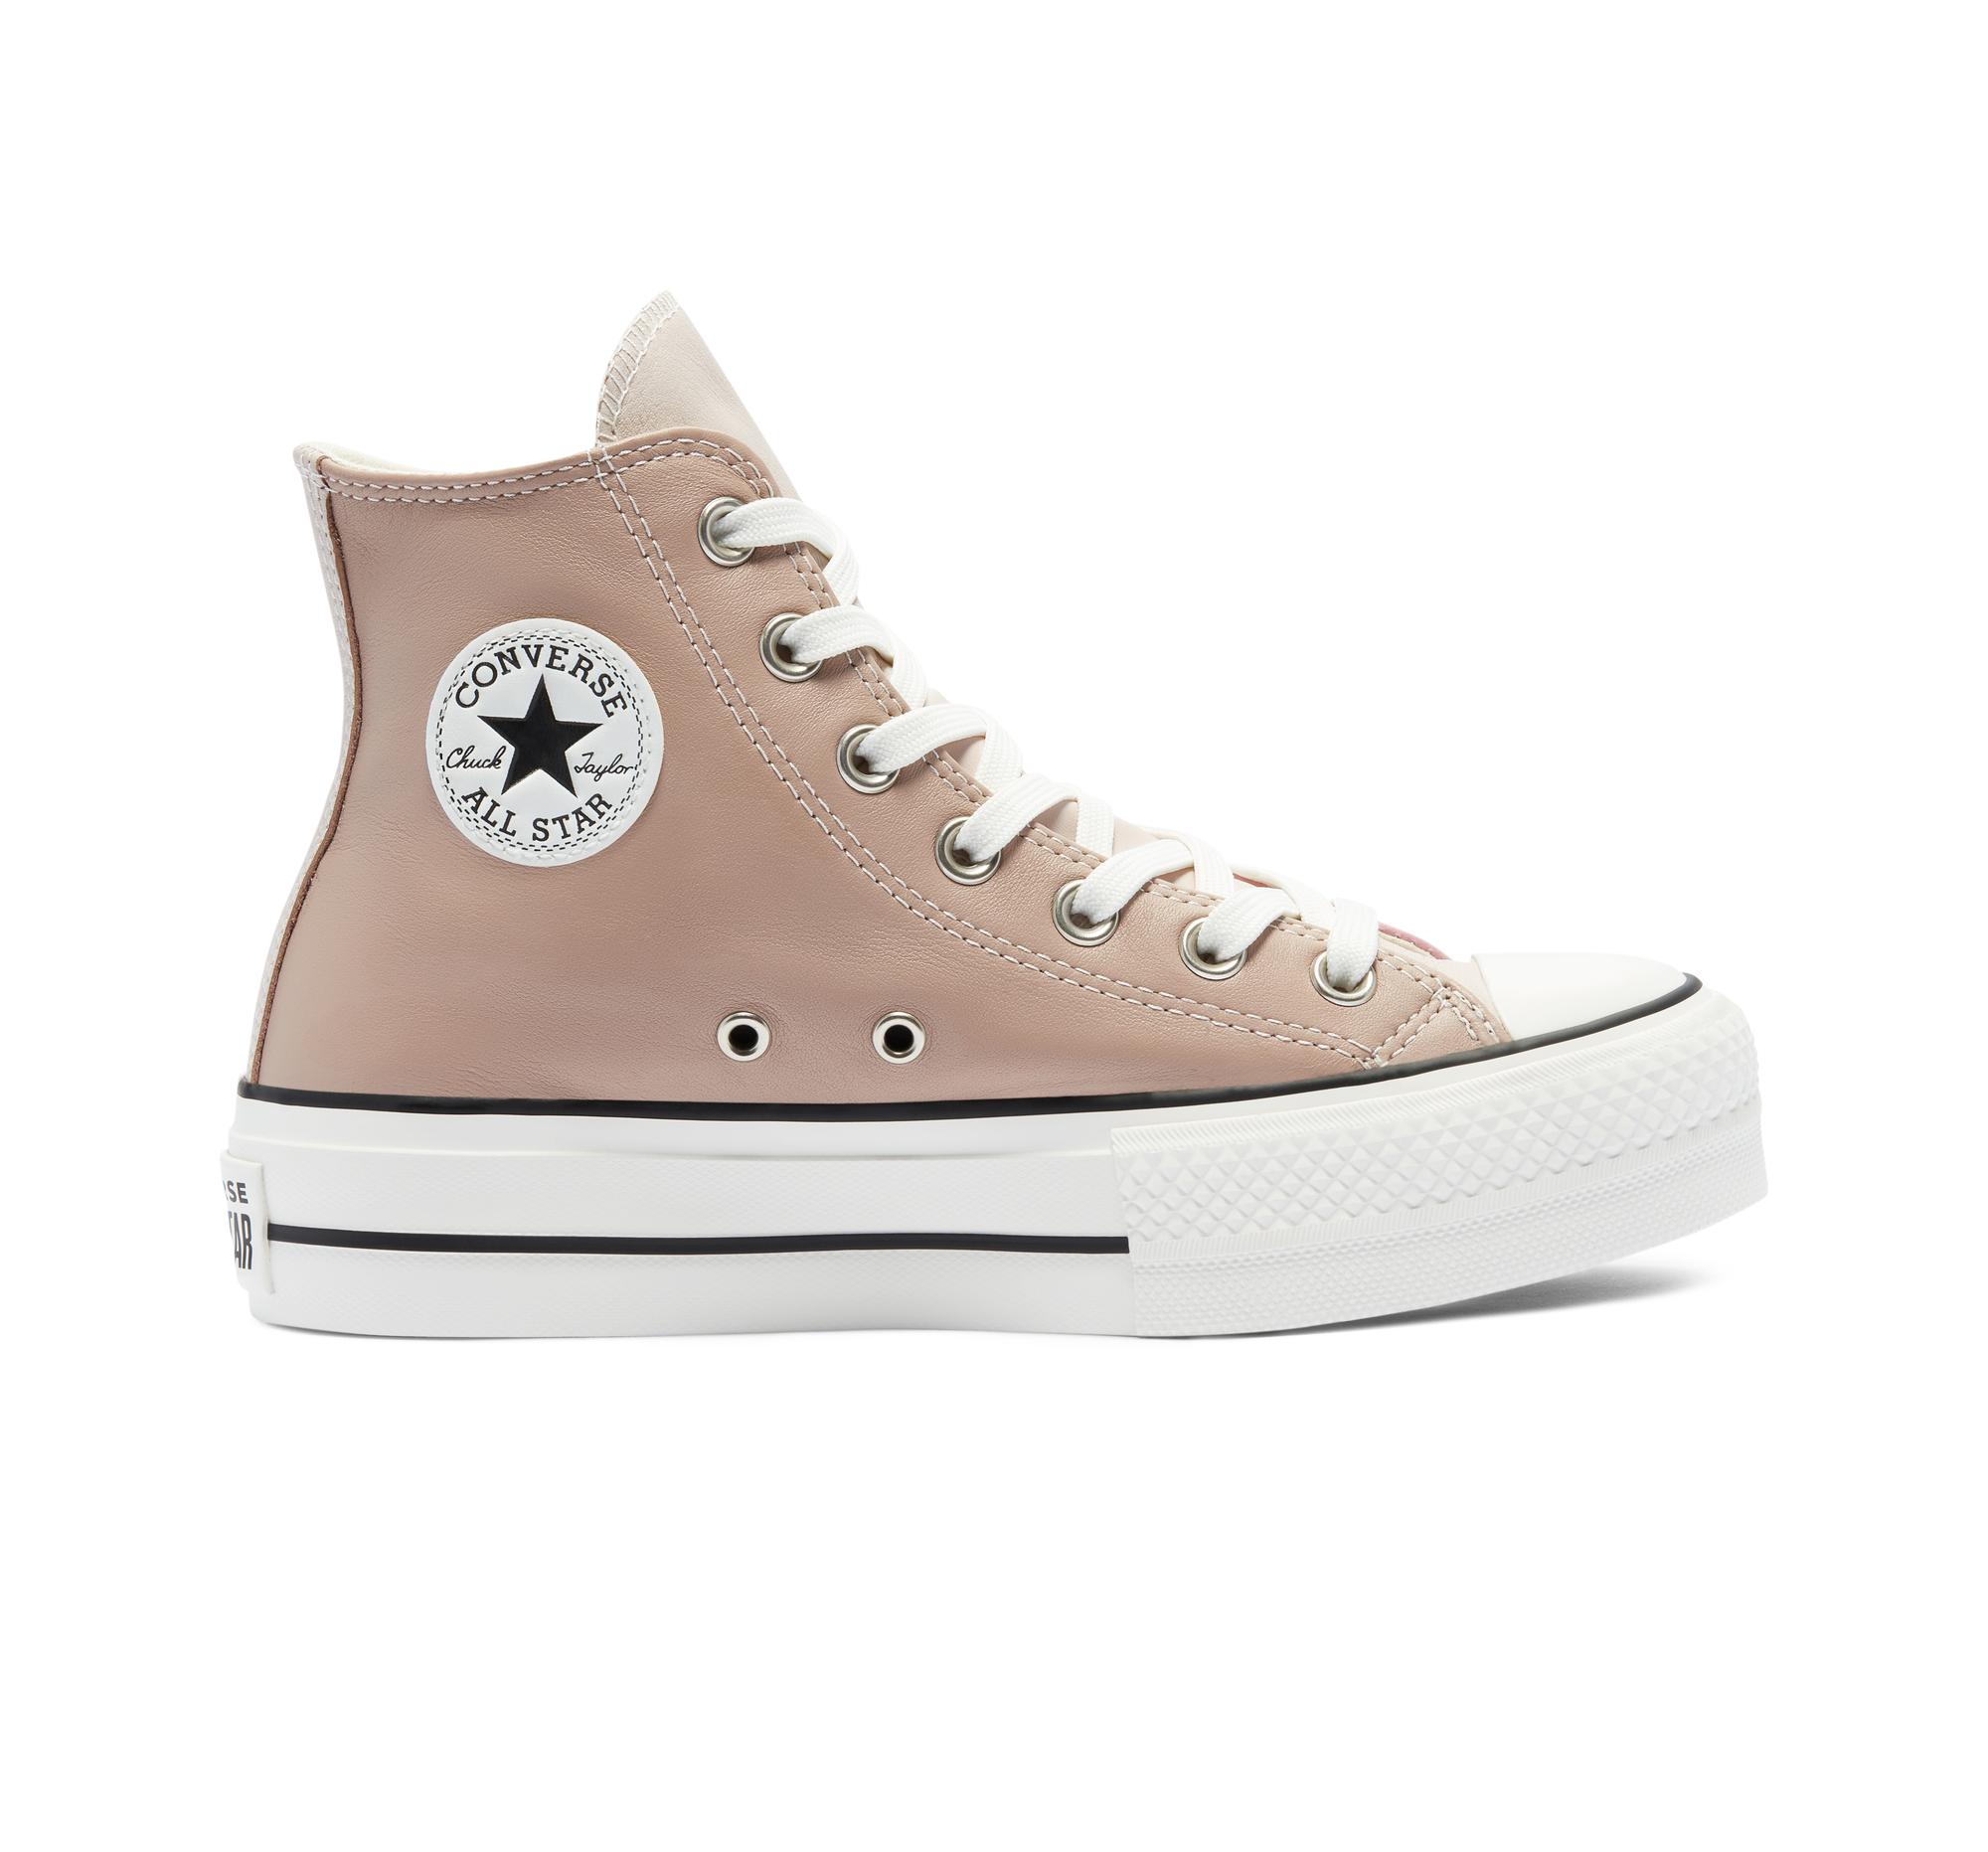 Converse Neutral Tones Platform Chuck Taylor All Star in Brown | Lyst